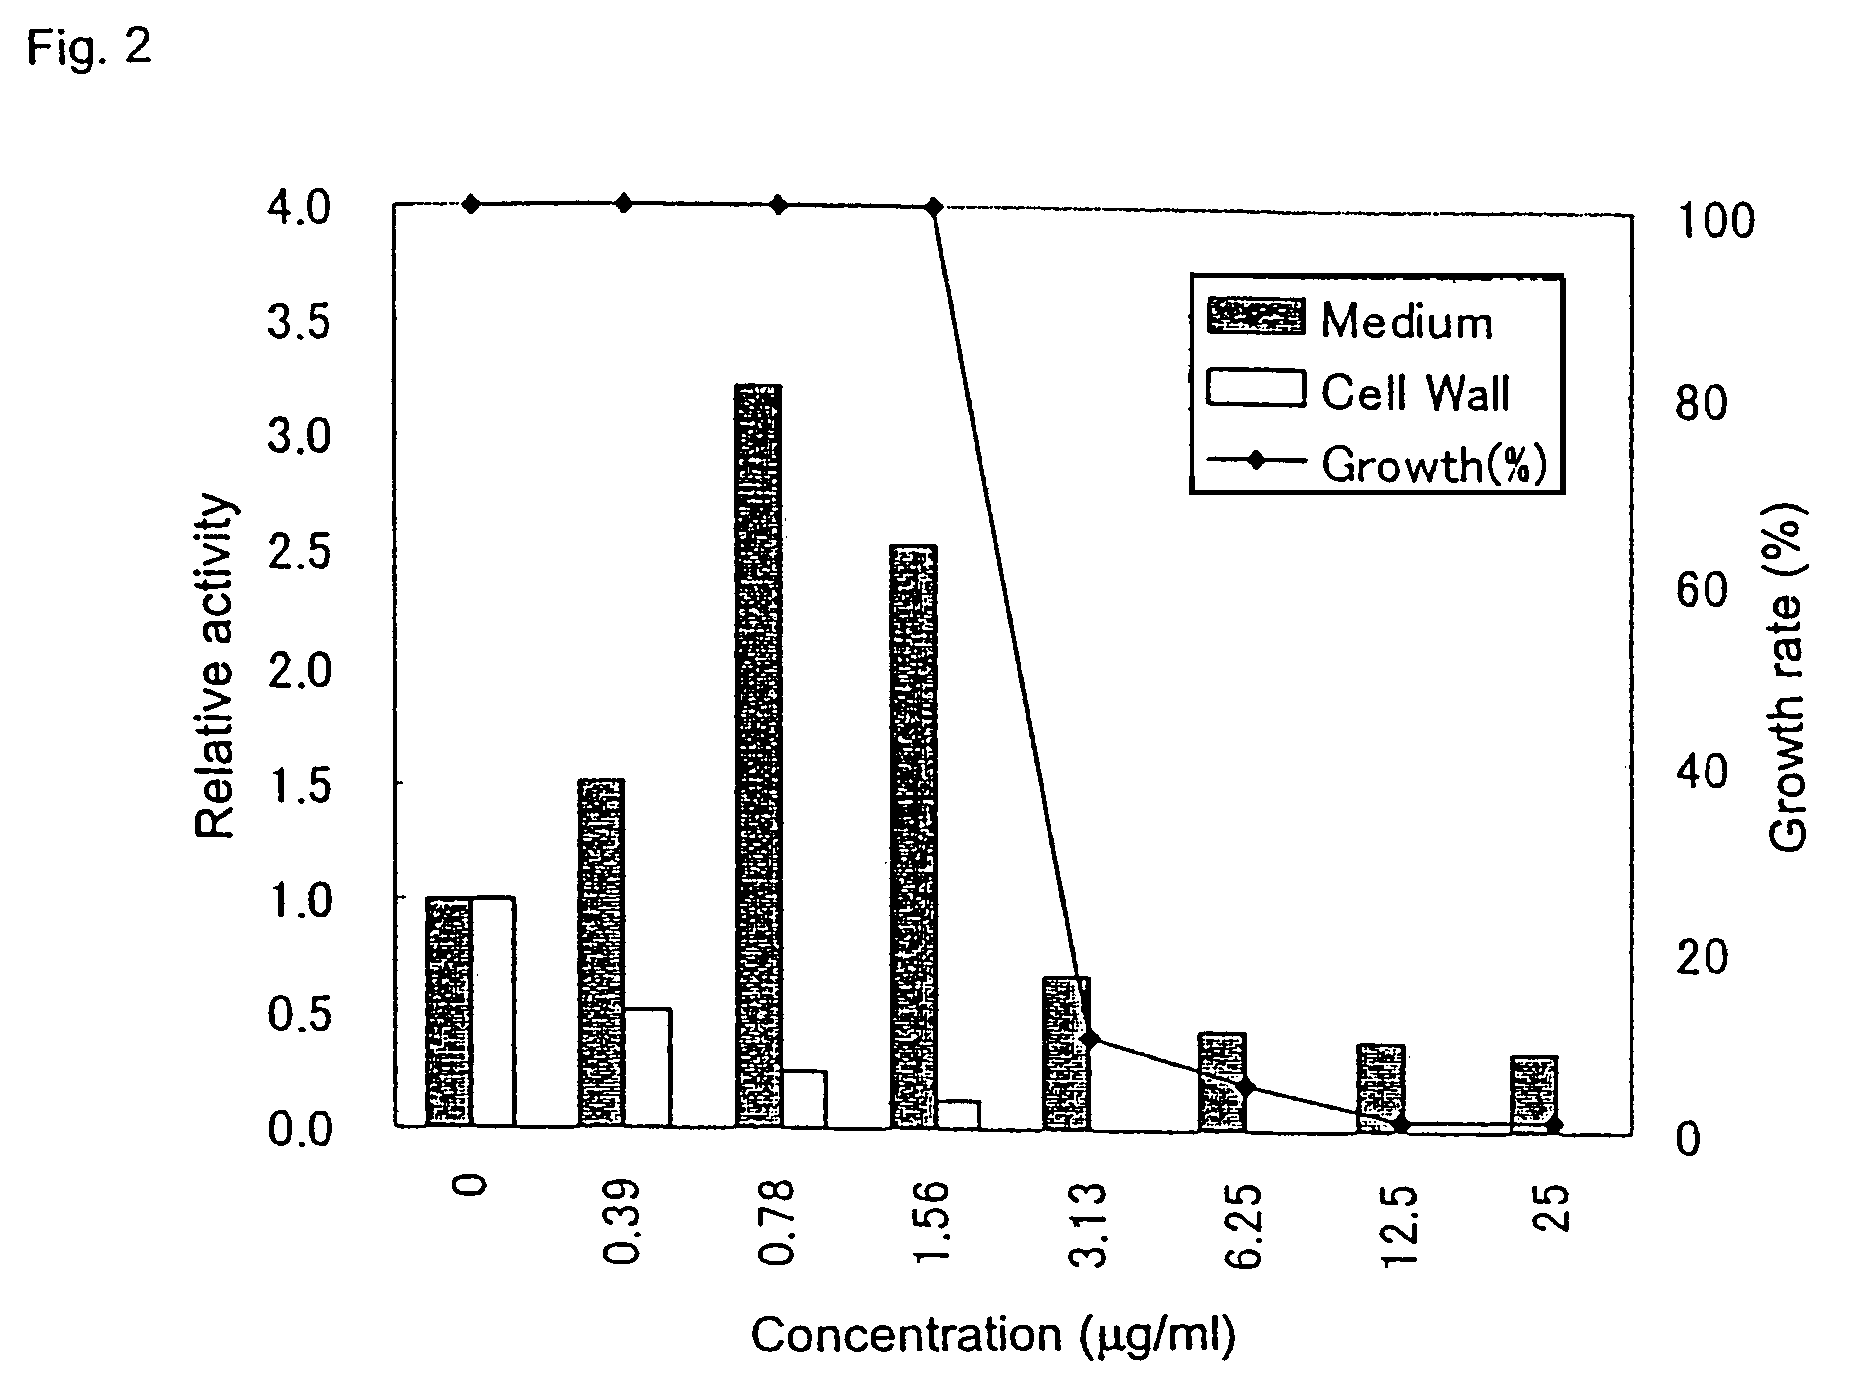 Fungal cell wall synthesis gene